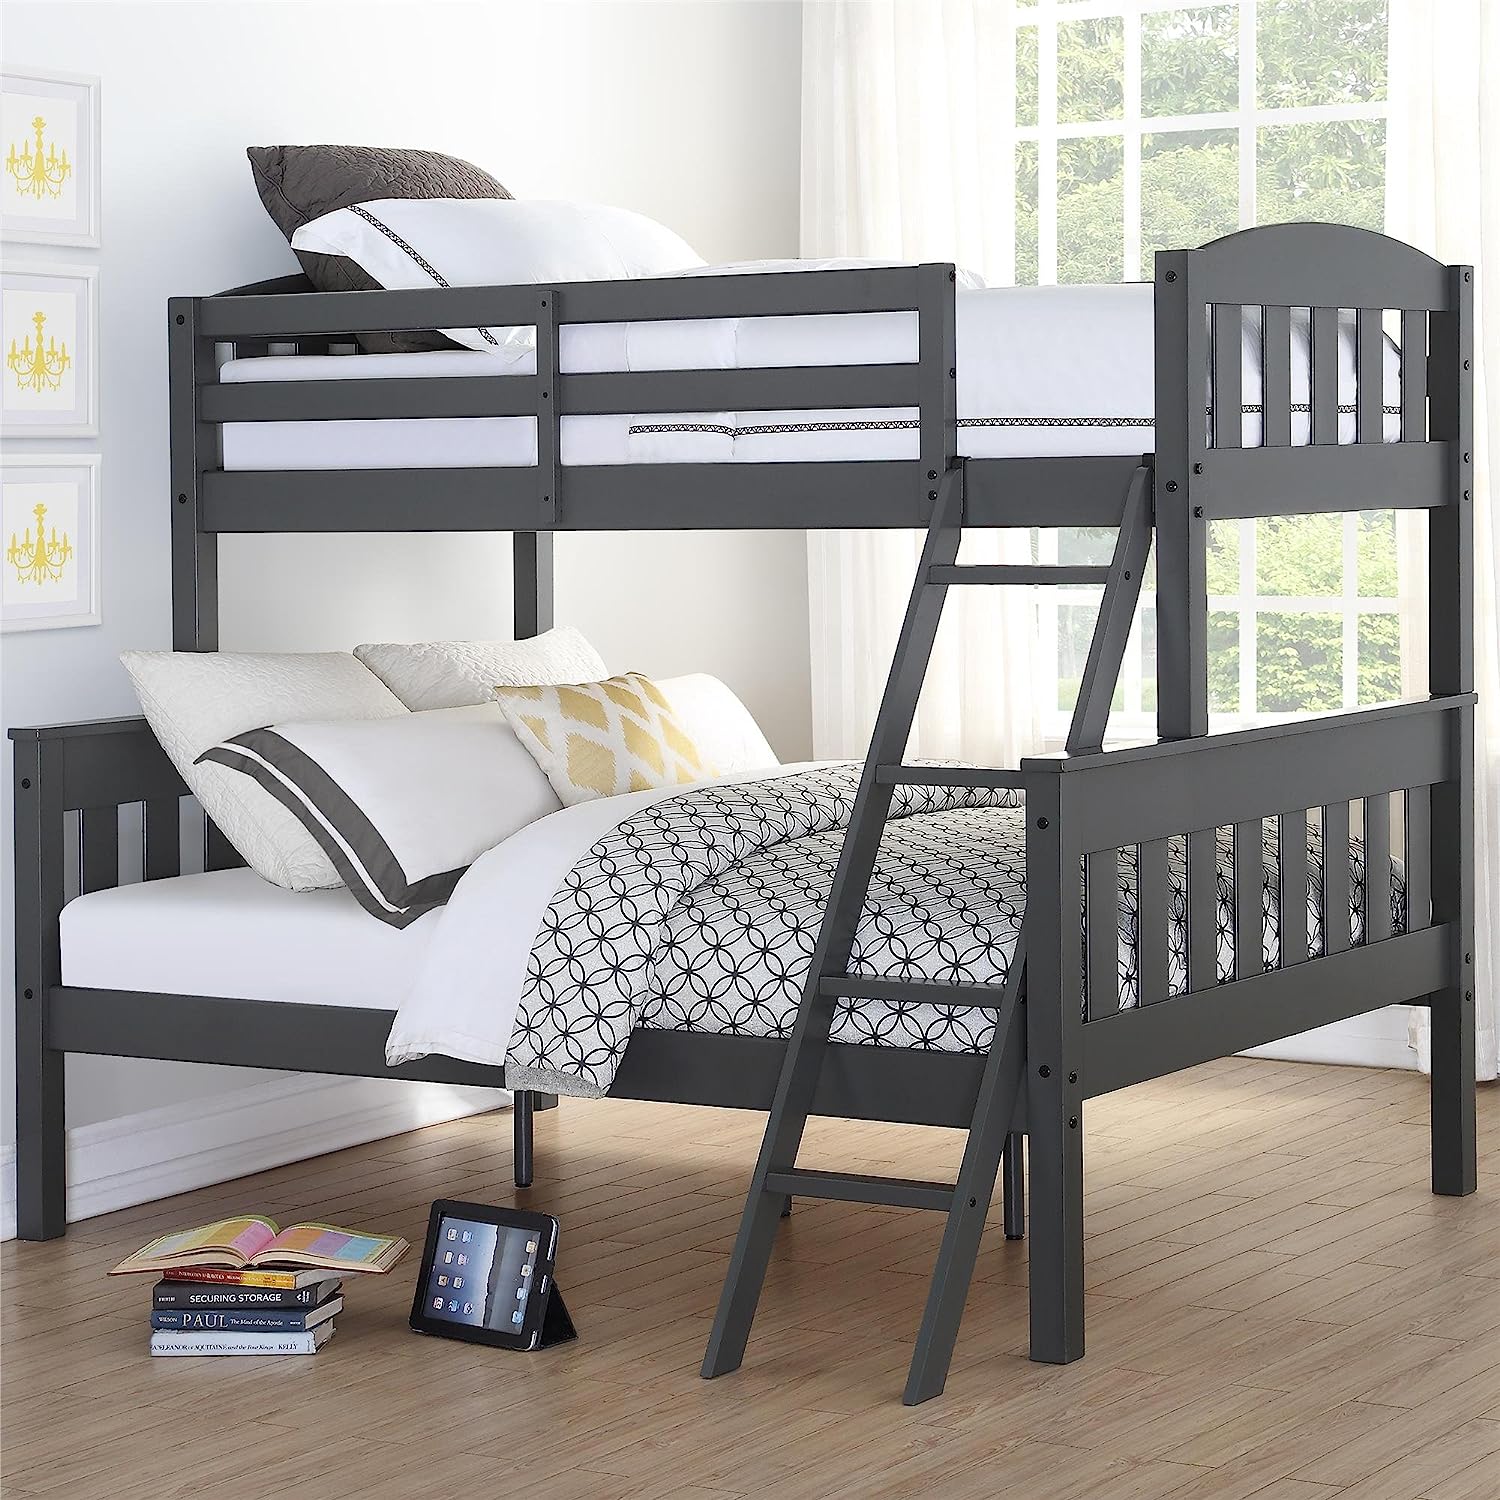 Dorel Living Airlie Solid Wood Bunk Beds Twin Over [...]